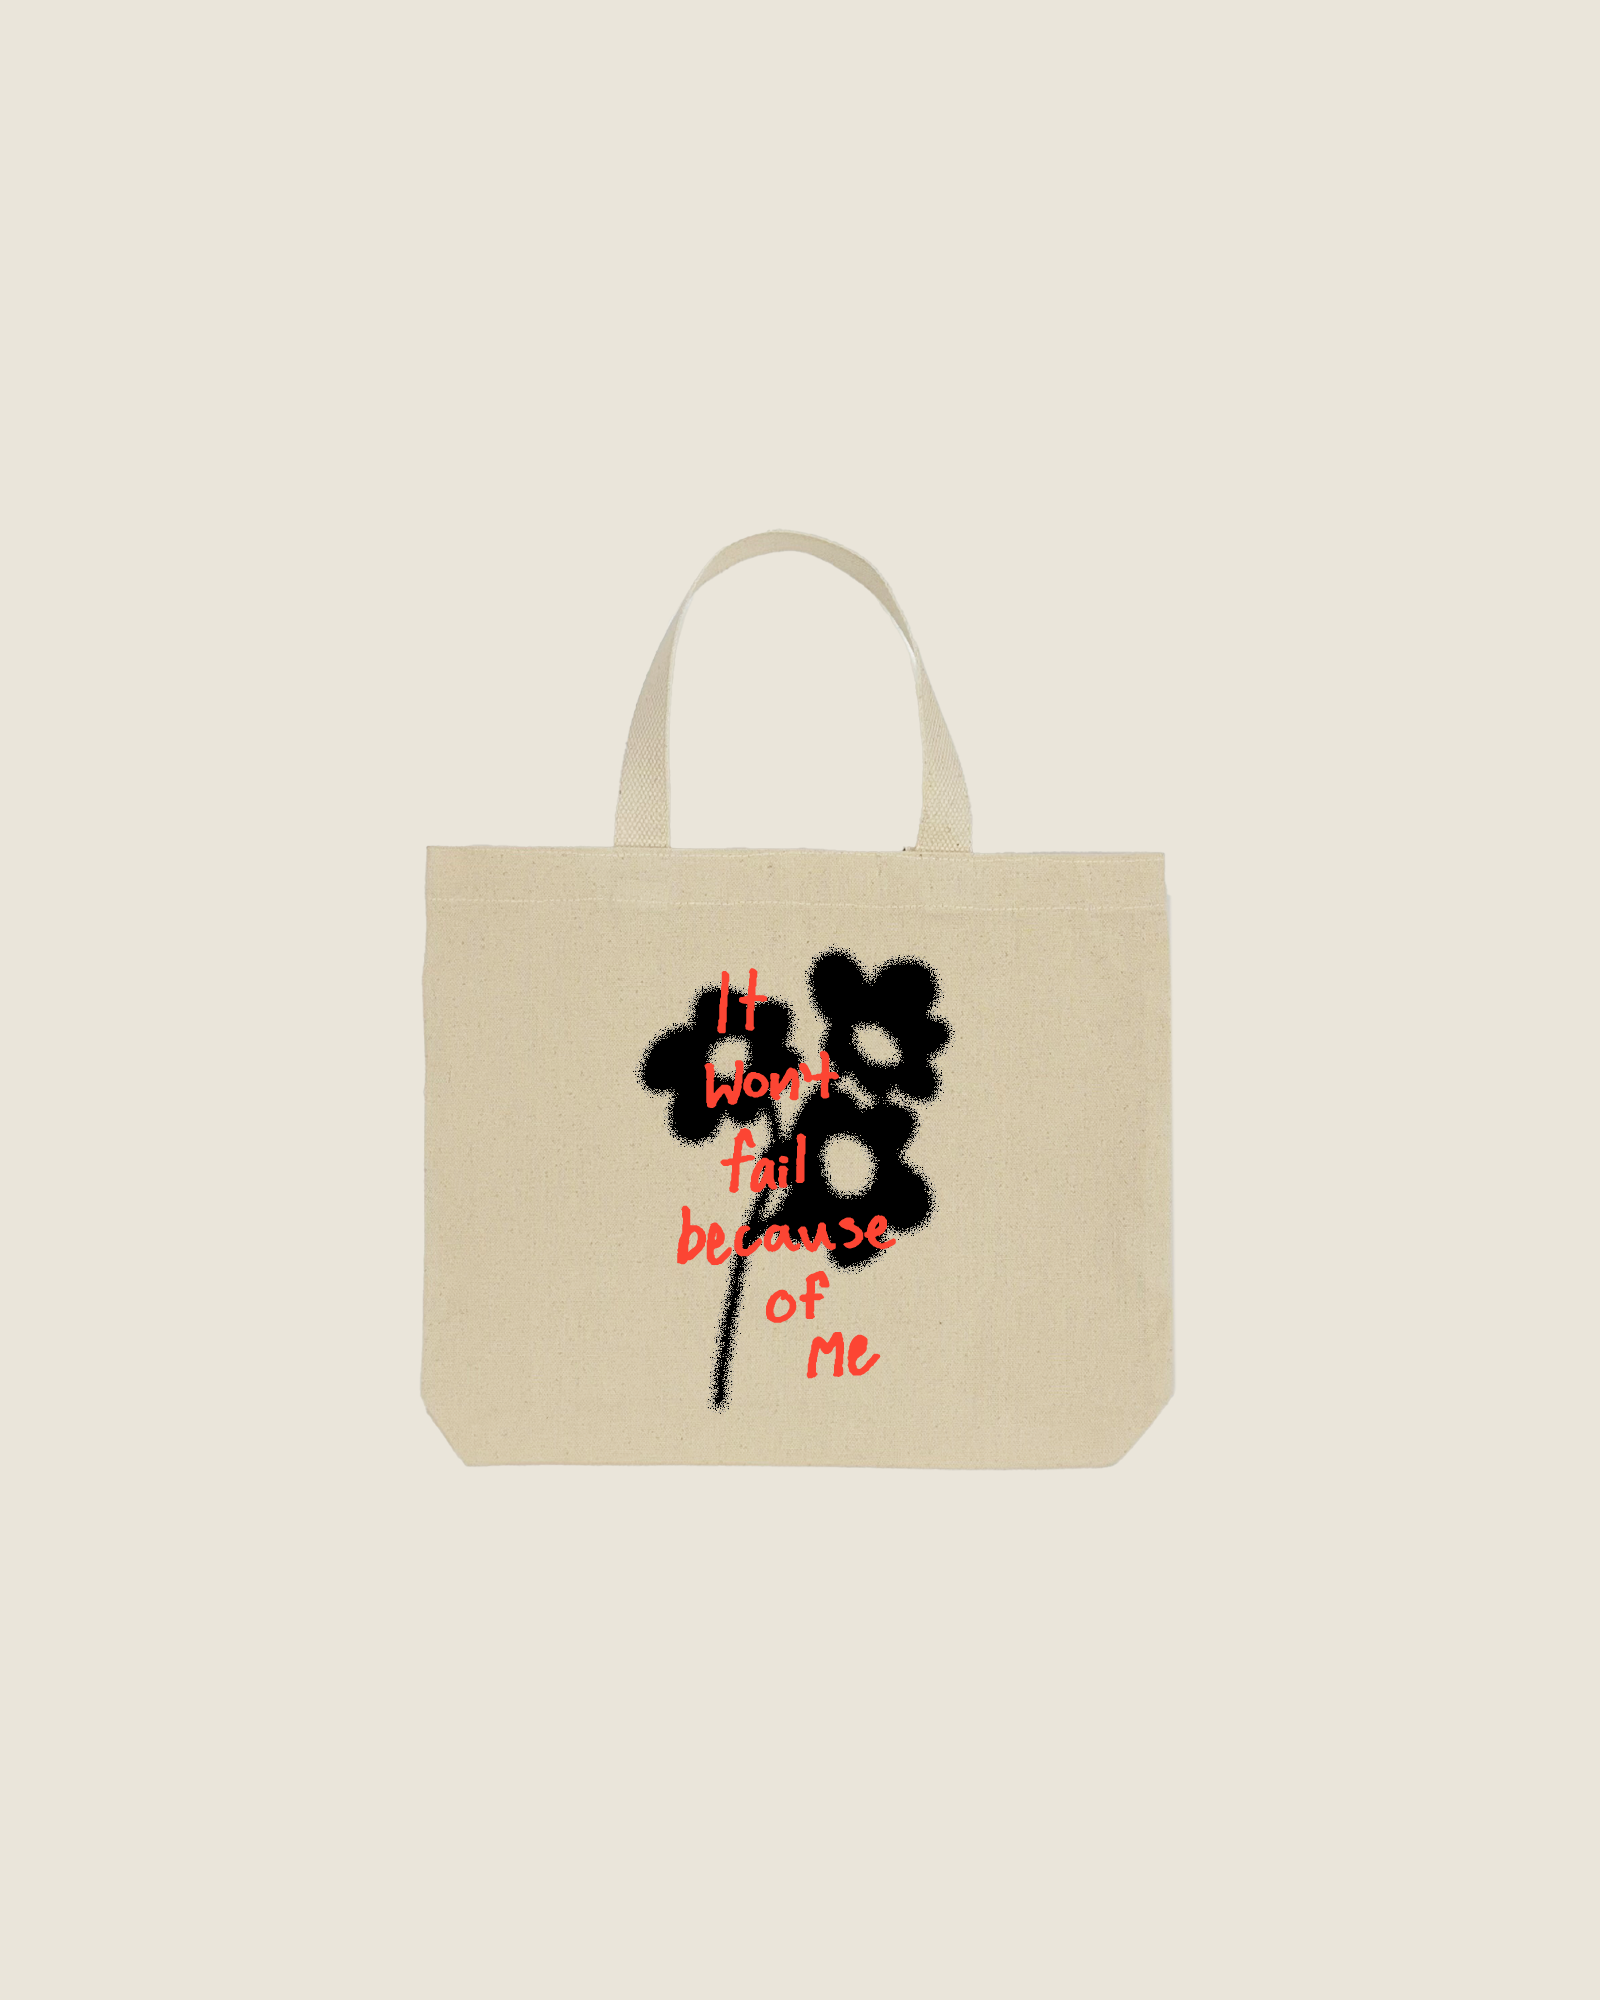 PRE-ORDER: "IT WON'T FAIL BECAUSE OF ME" TOTE BAG